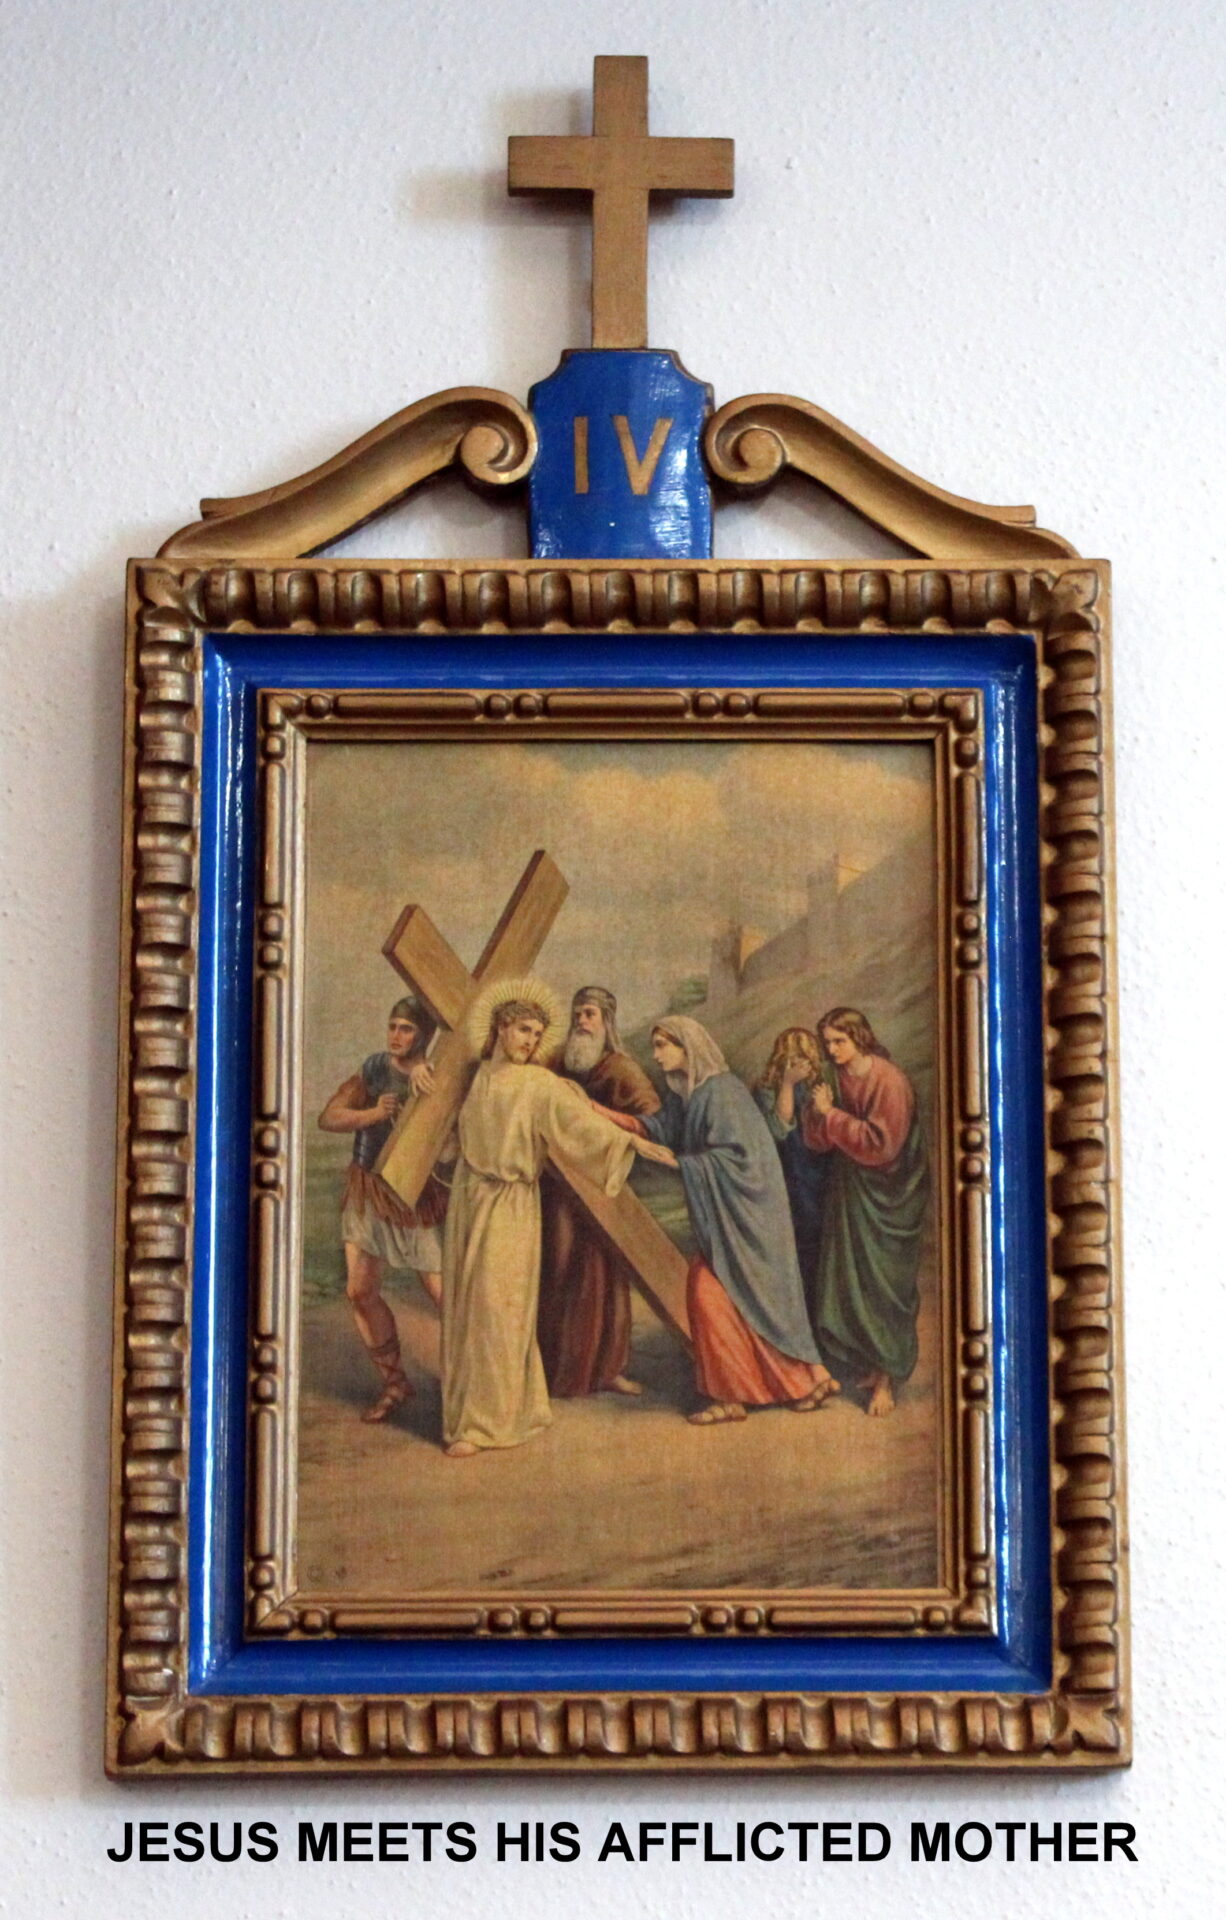 The forth chapter of the station of the cross